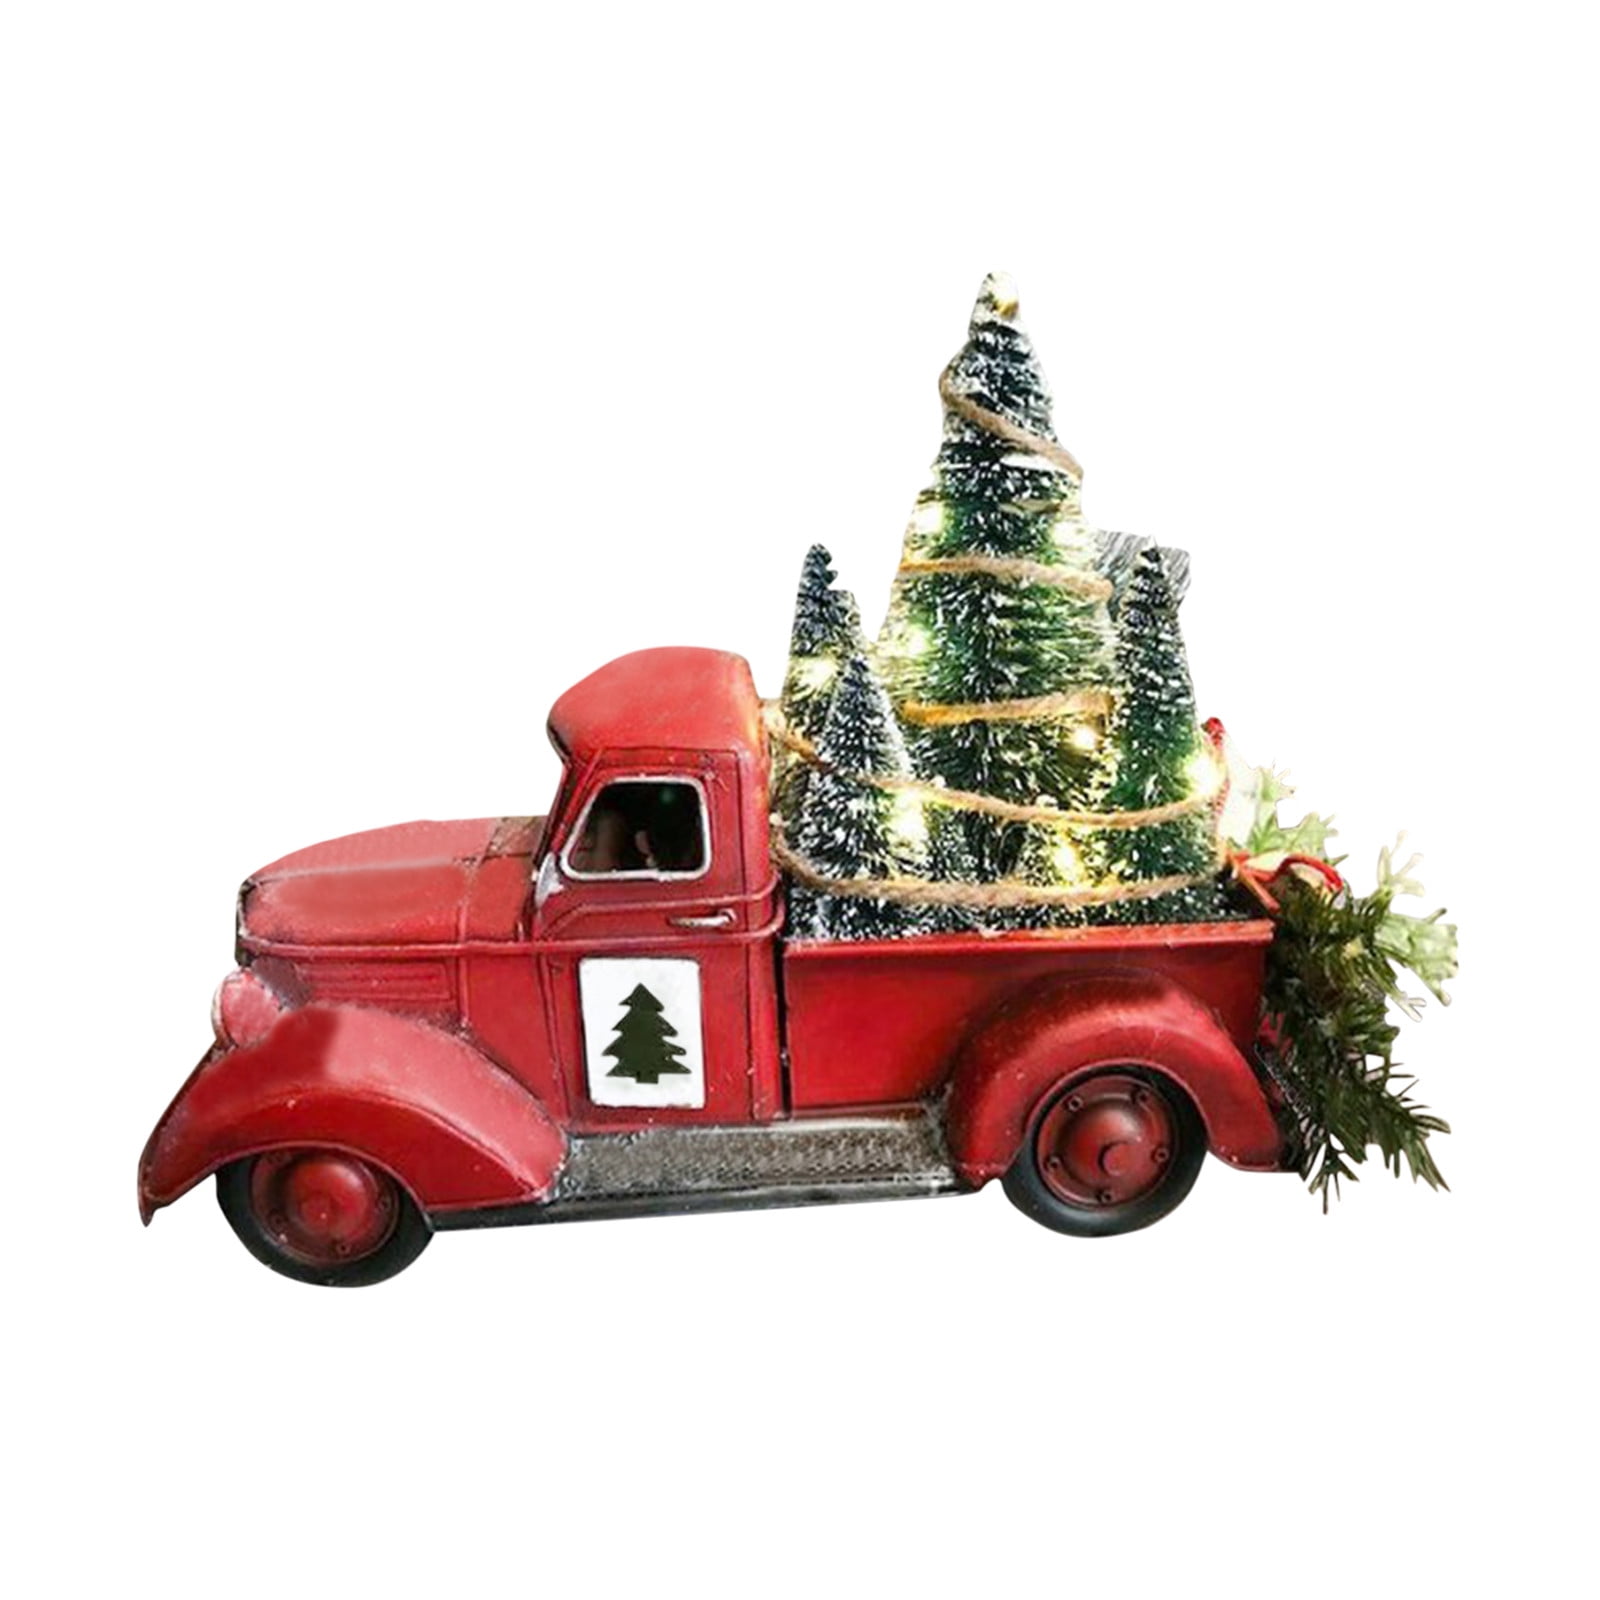 New Galvanized Metal Farmhouse Truck Ornament With Tree Rustic Christmas Village 